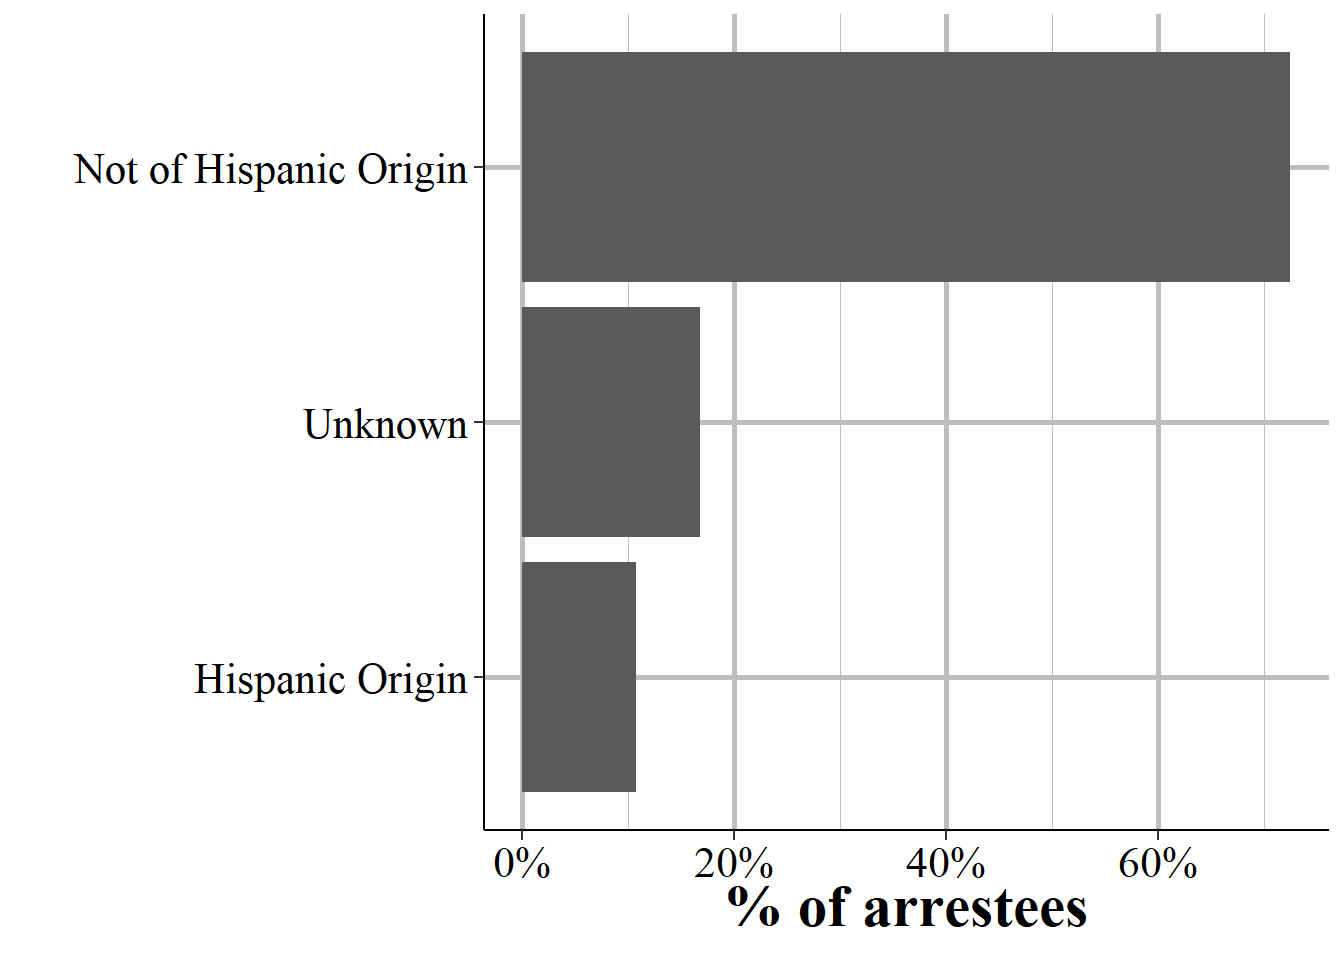 The ethnicity of all arrestees reported in the 2019 NIBRS data.